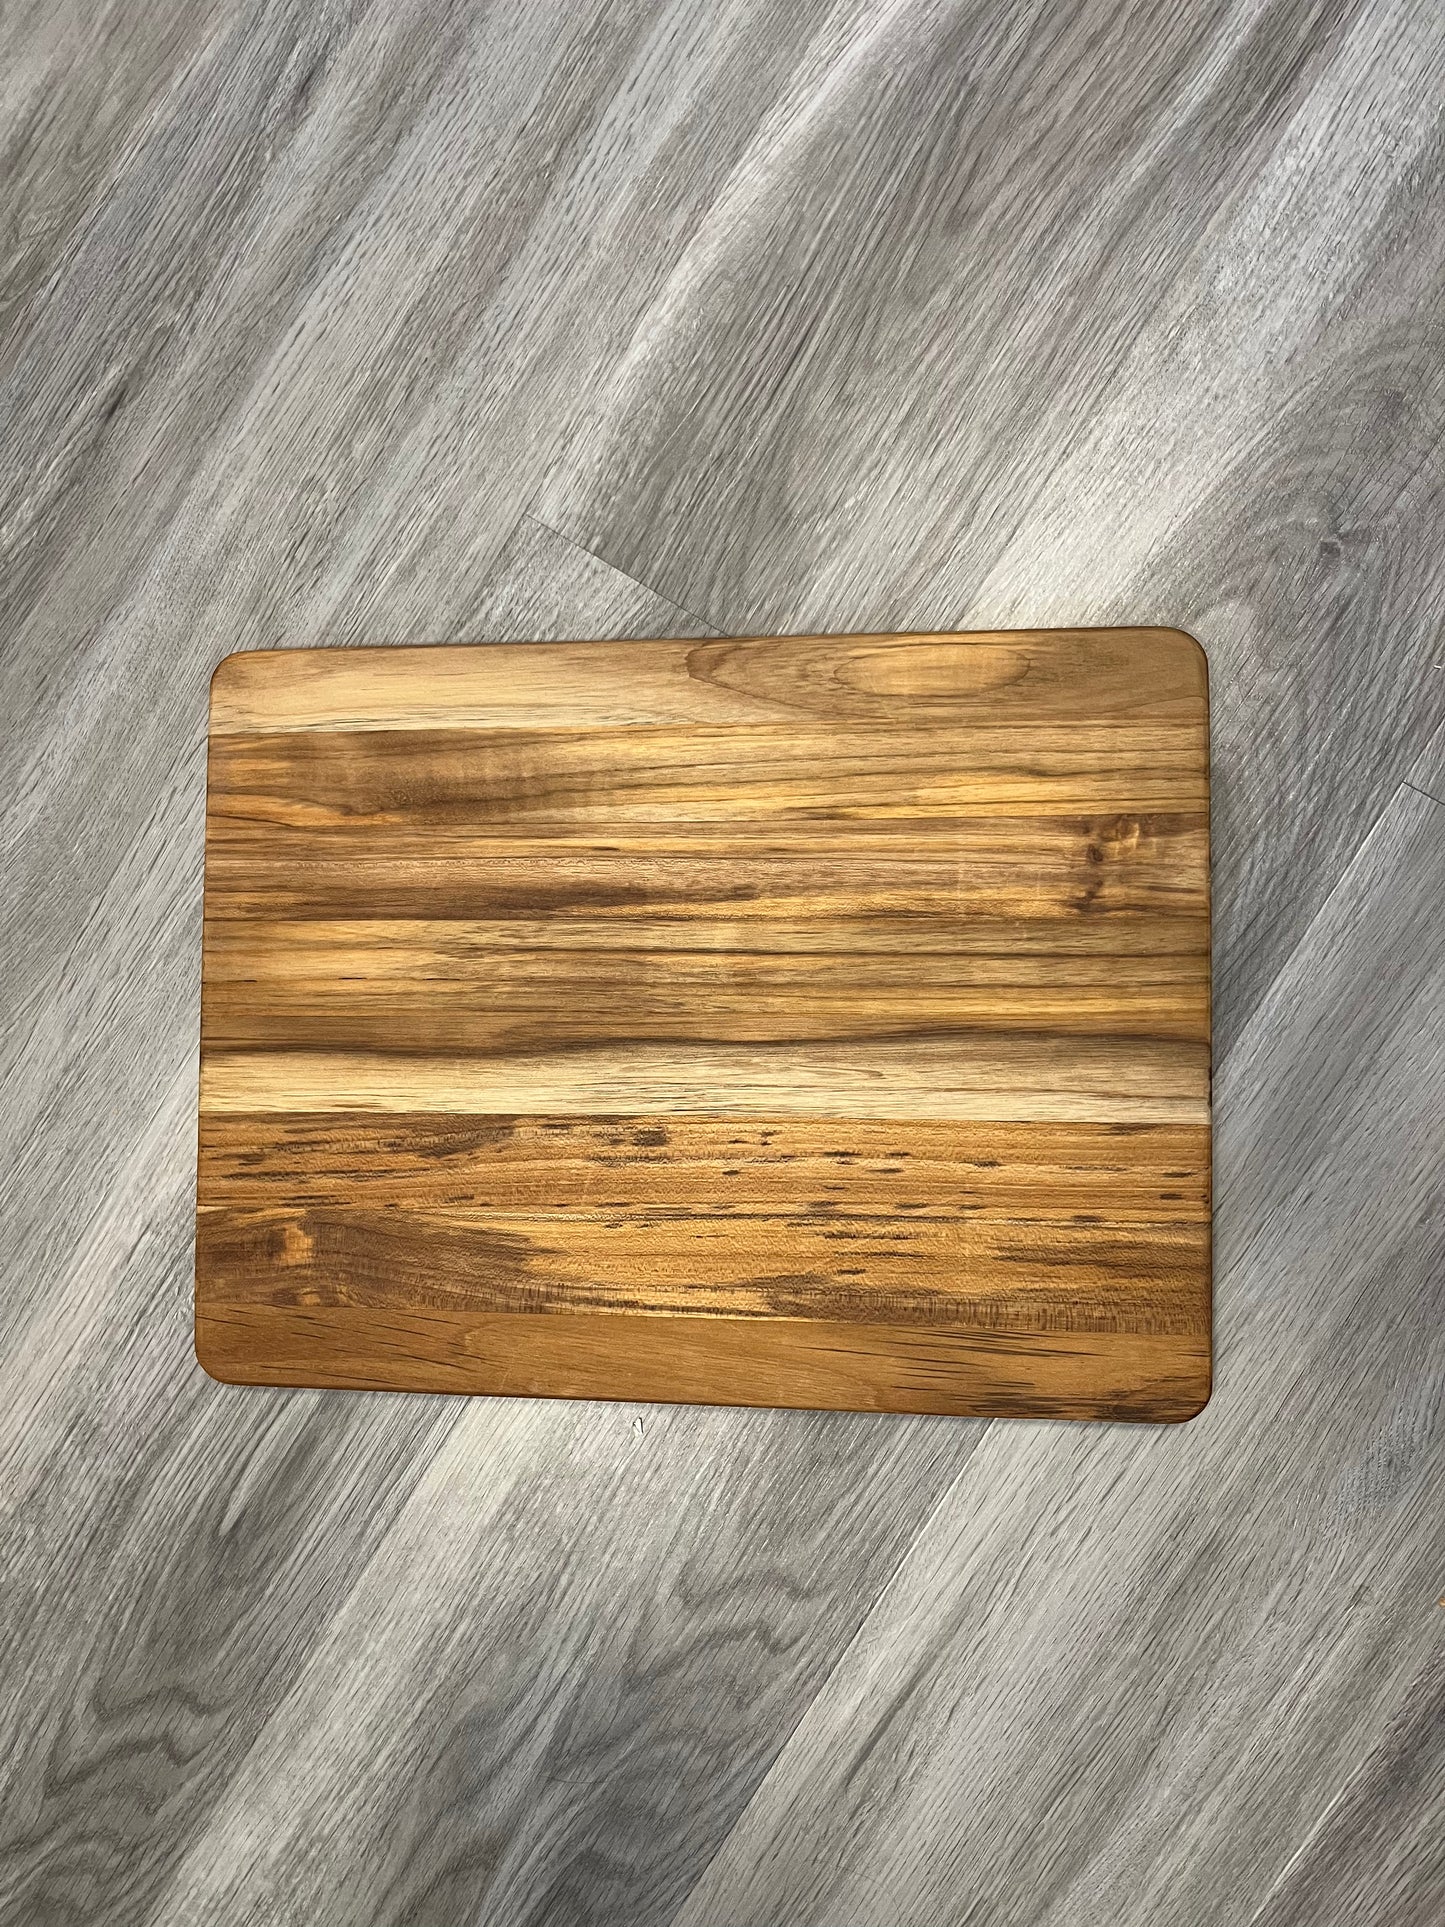 Cutting Boards - Pick a cutting board to engrave